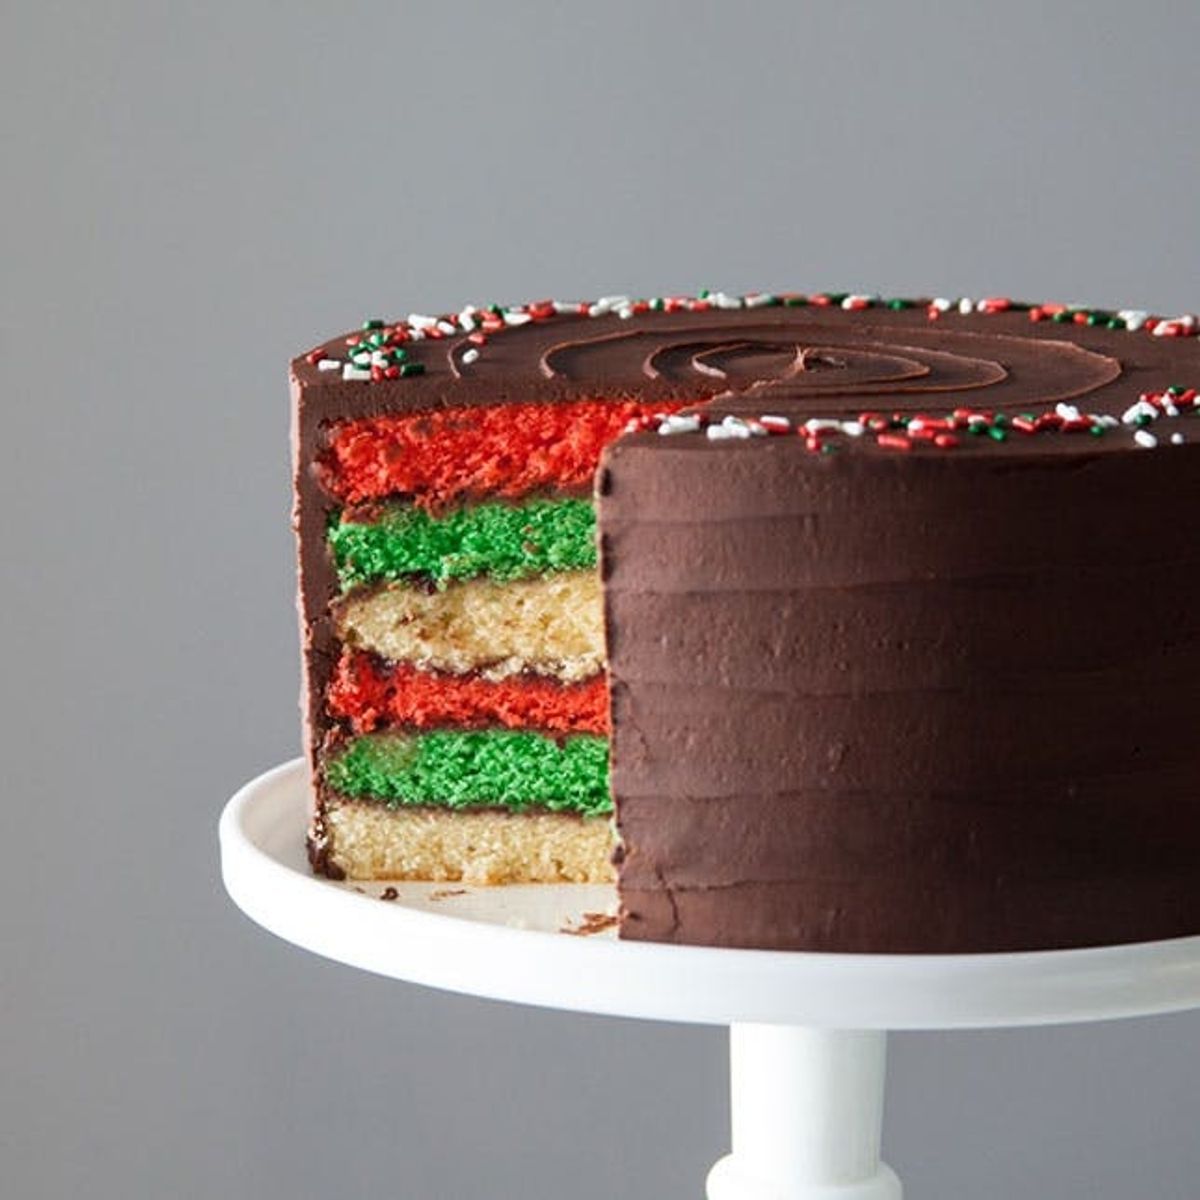 How to Make an Italian Rainbow Cookie Cake for the Holidays